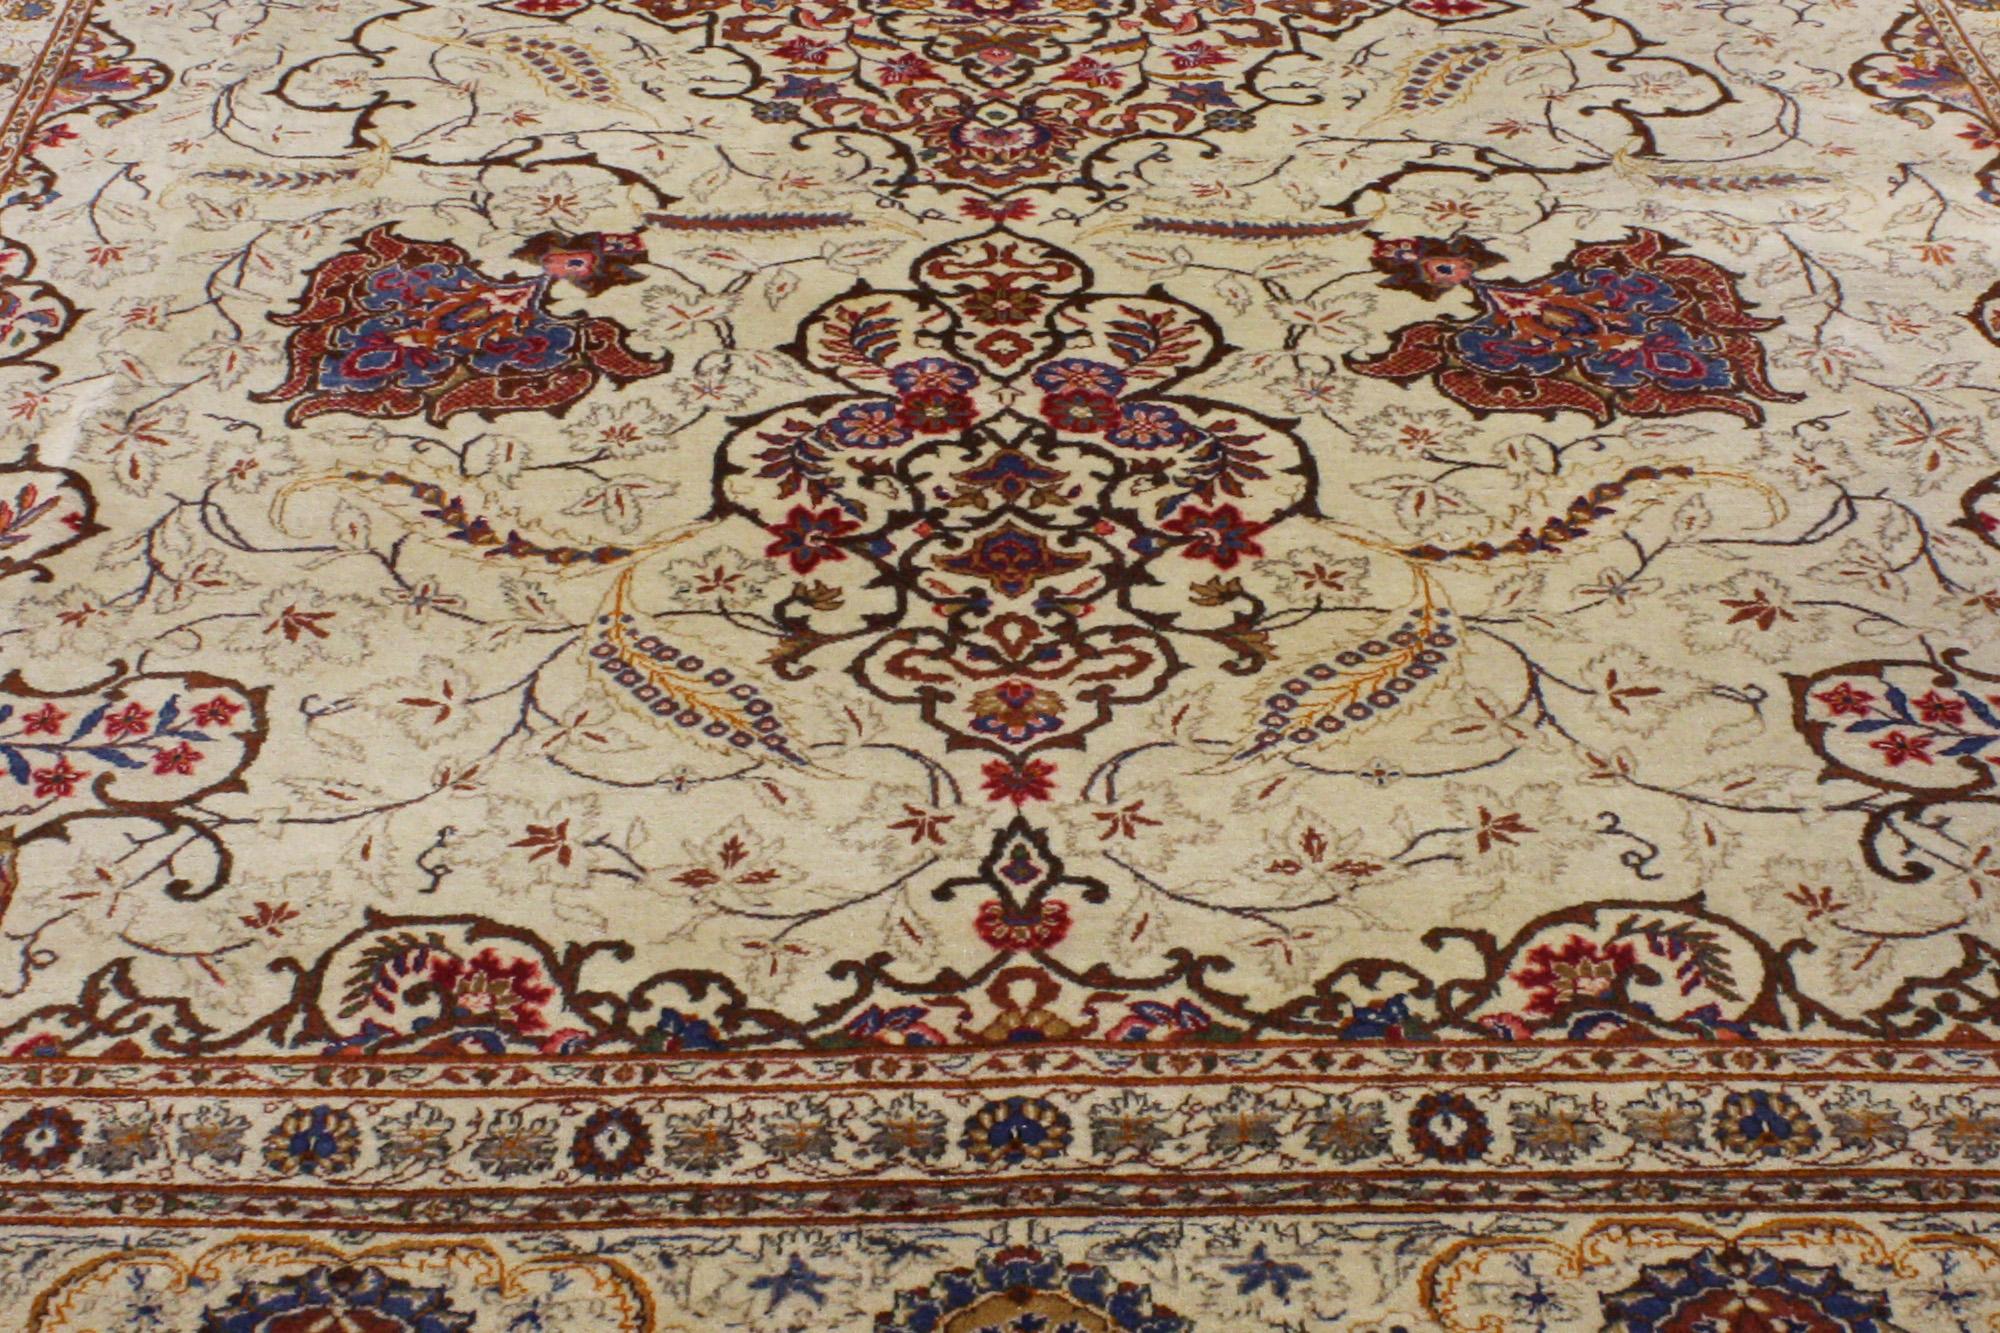 Antique Persian Kashan Rug, Timeless Elegance Meets Stately Decadence In Good Condition For Sale In Dallas, TX